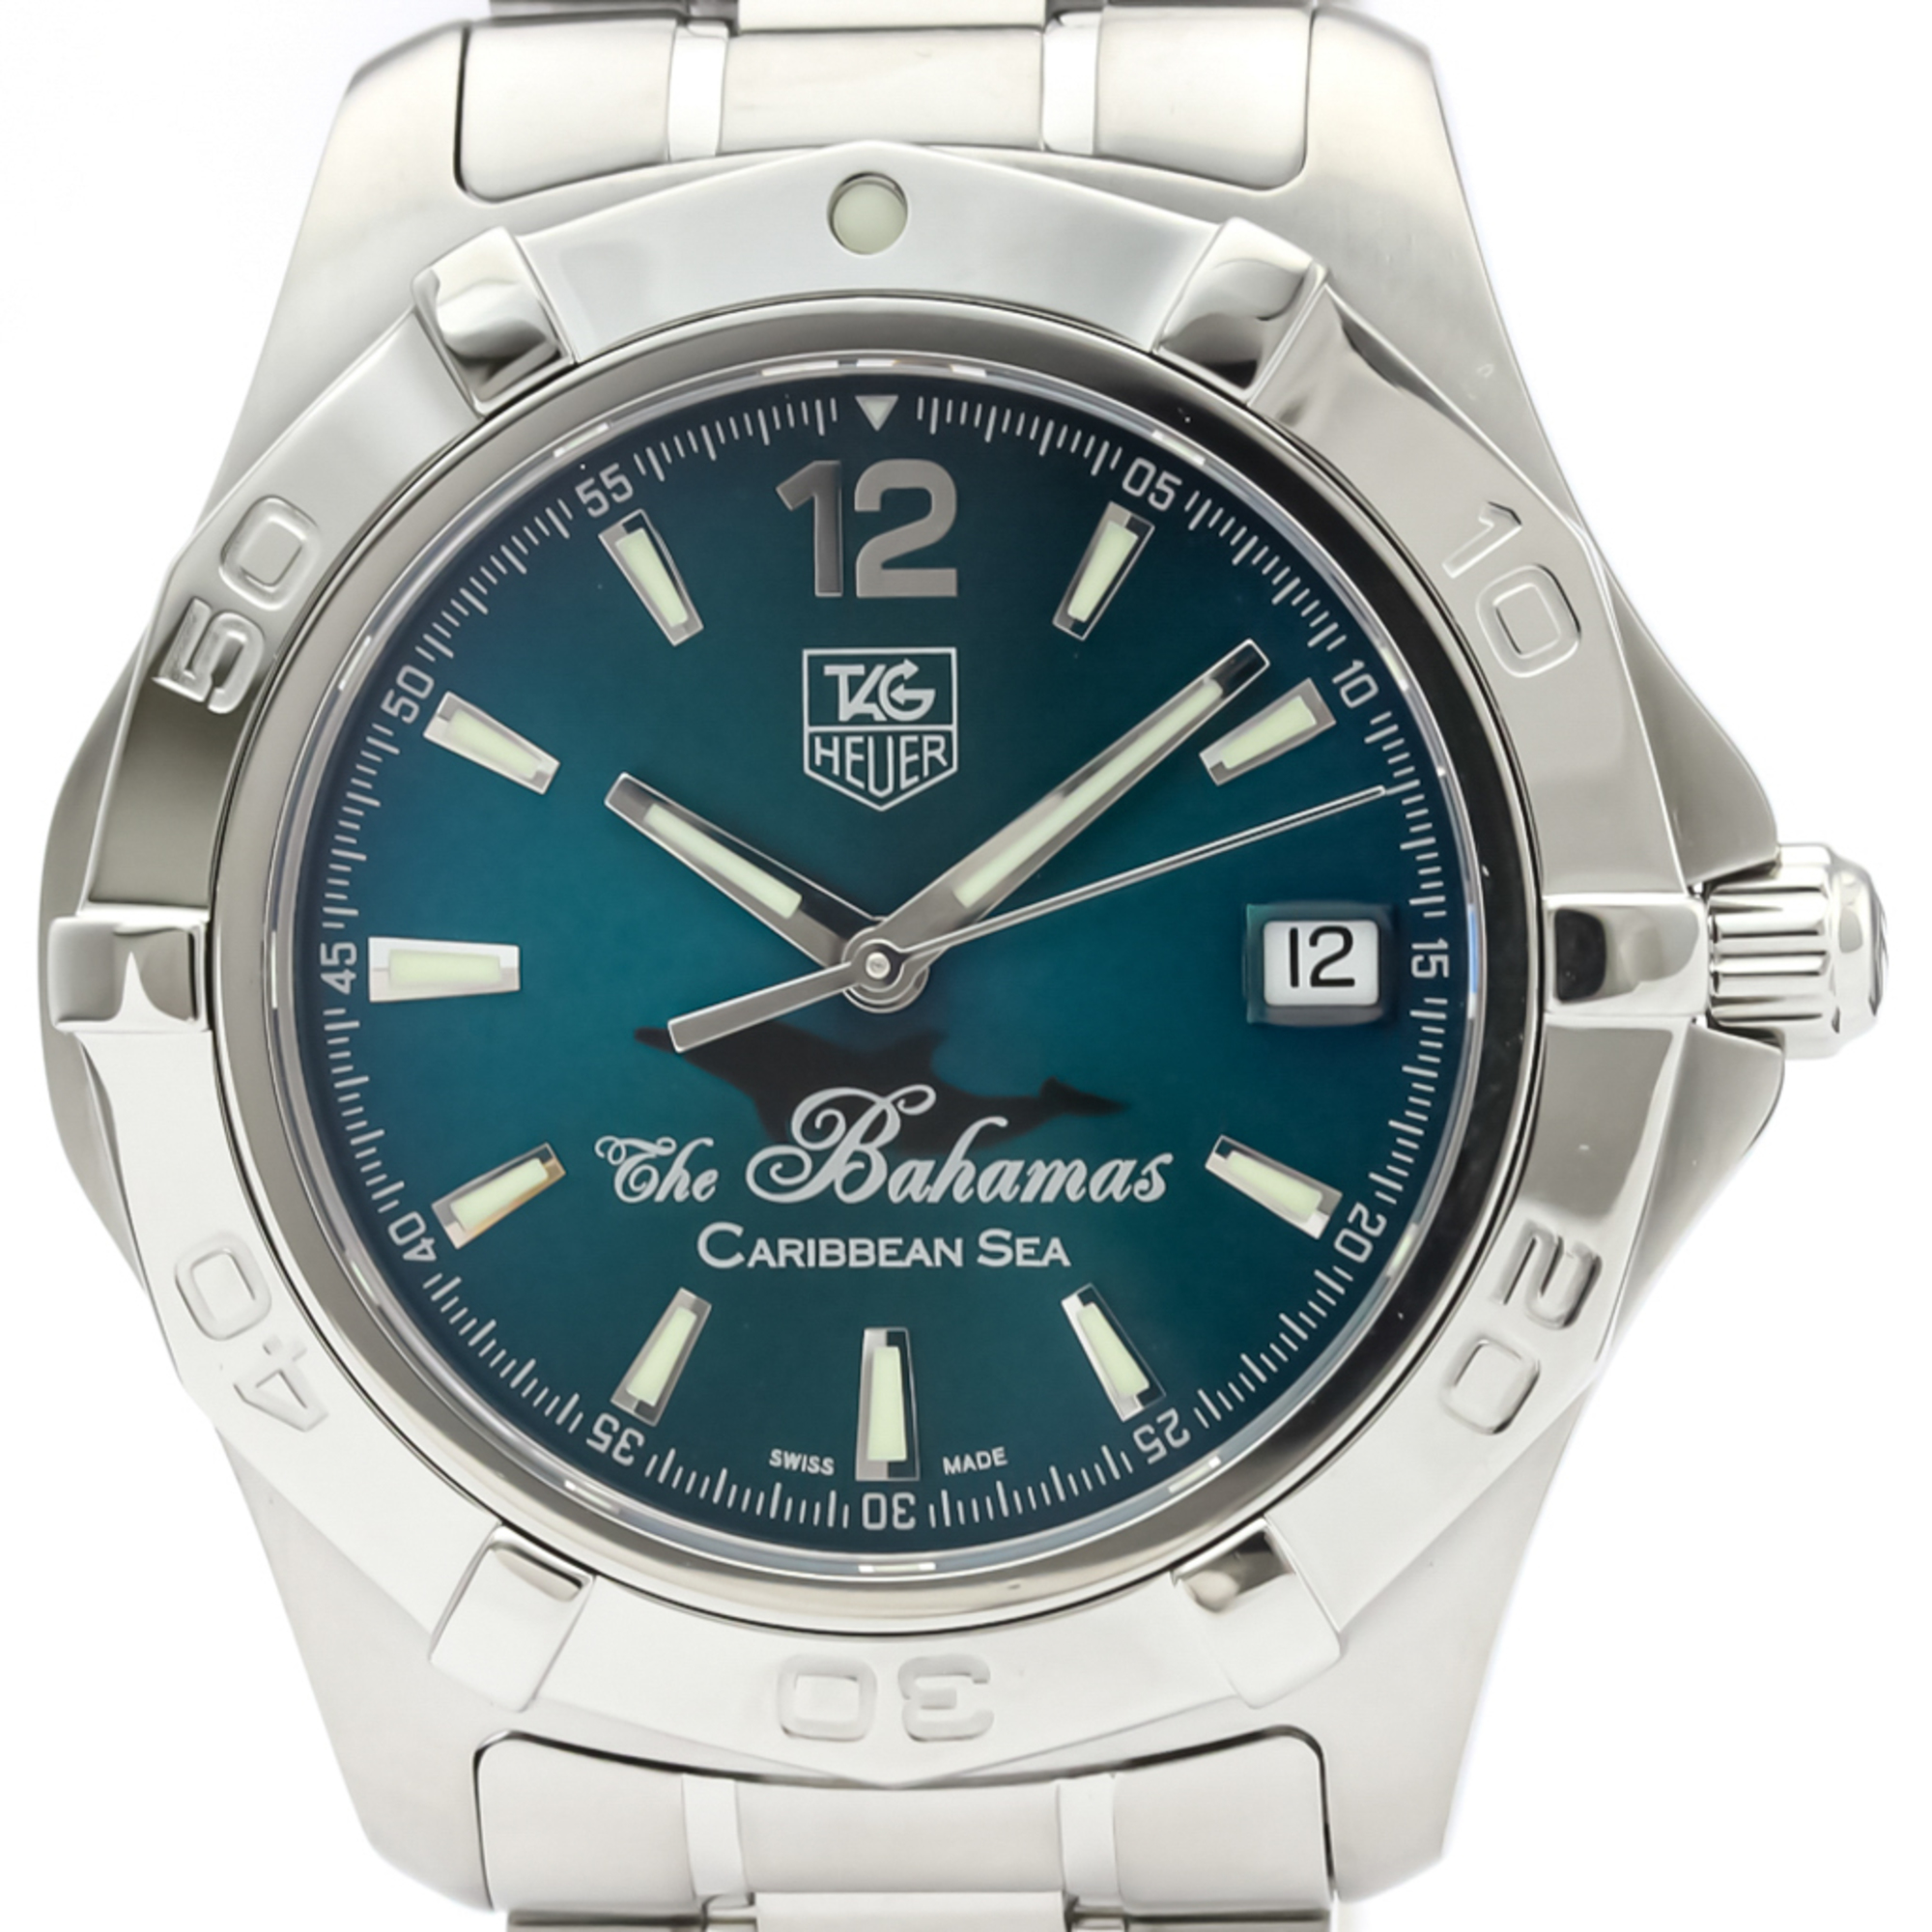 Tag Heuer Aquaracer Automatic Stainless Steel Men's Sports Watch WAF211R